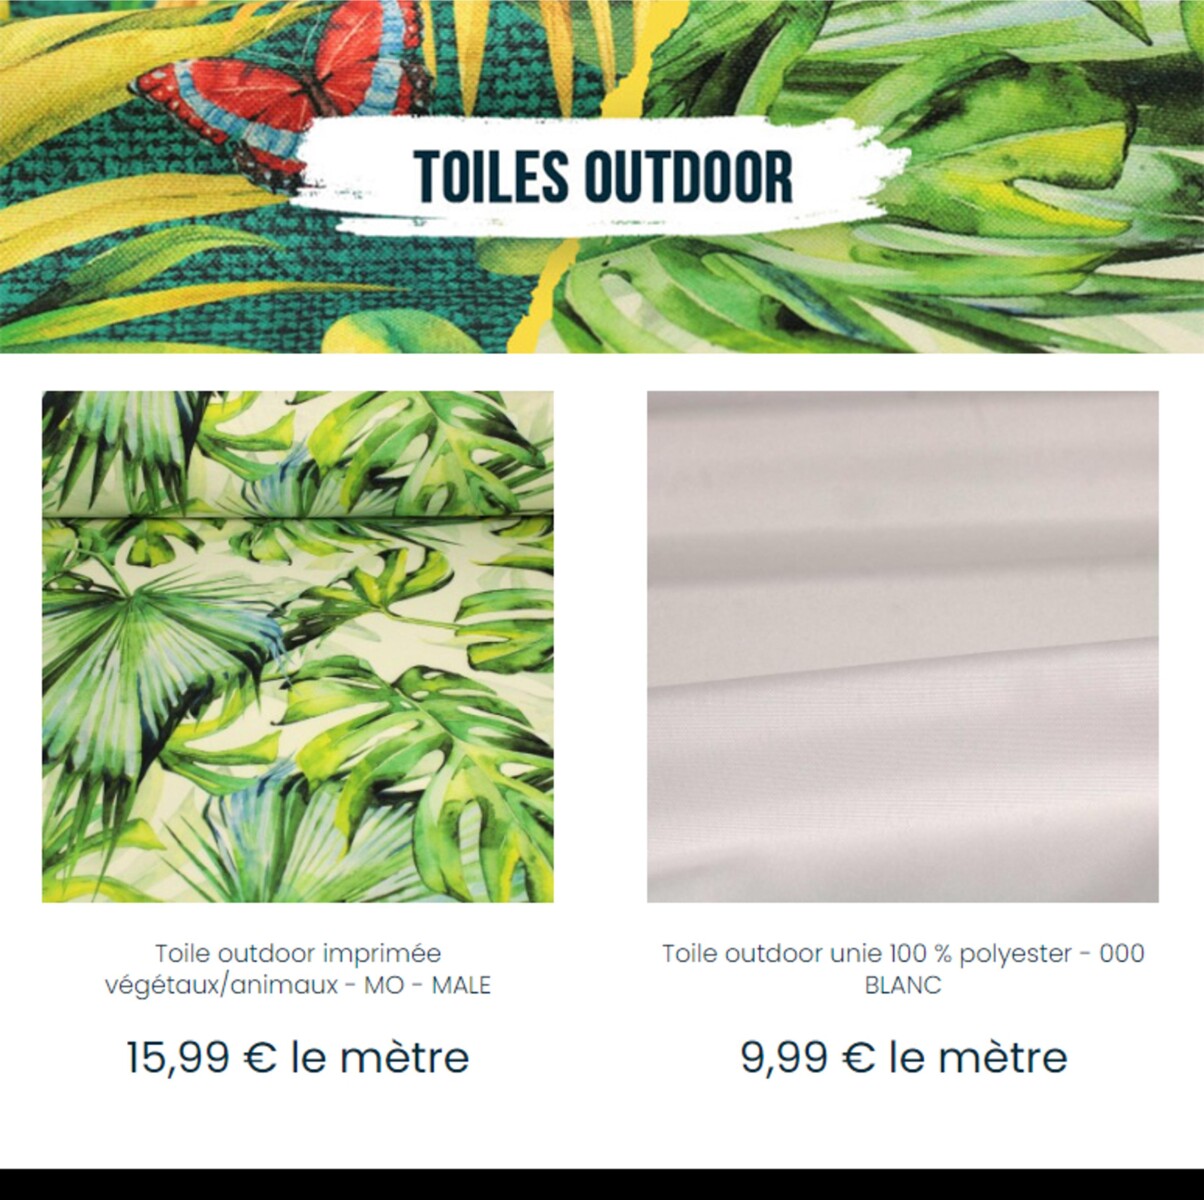 Catalogue TOILES OUTDOOR!, page 00005